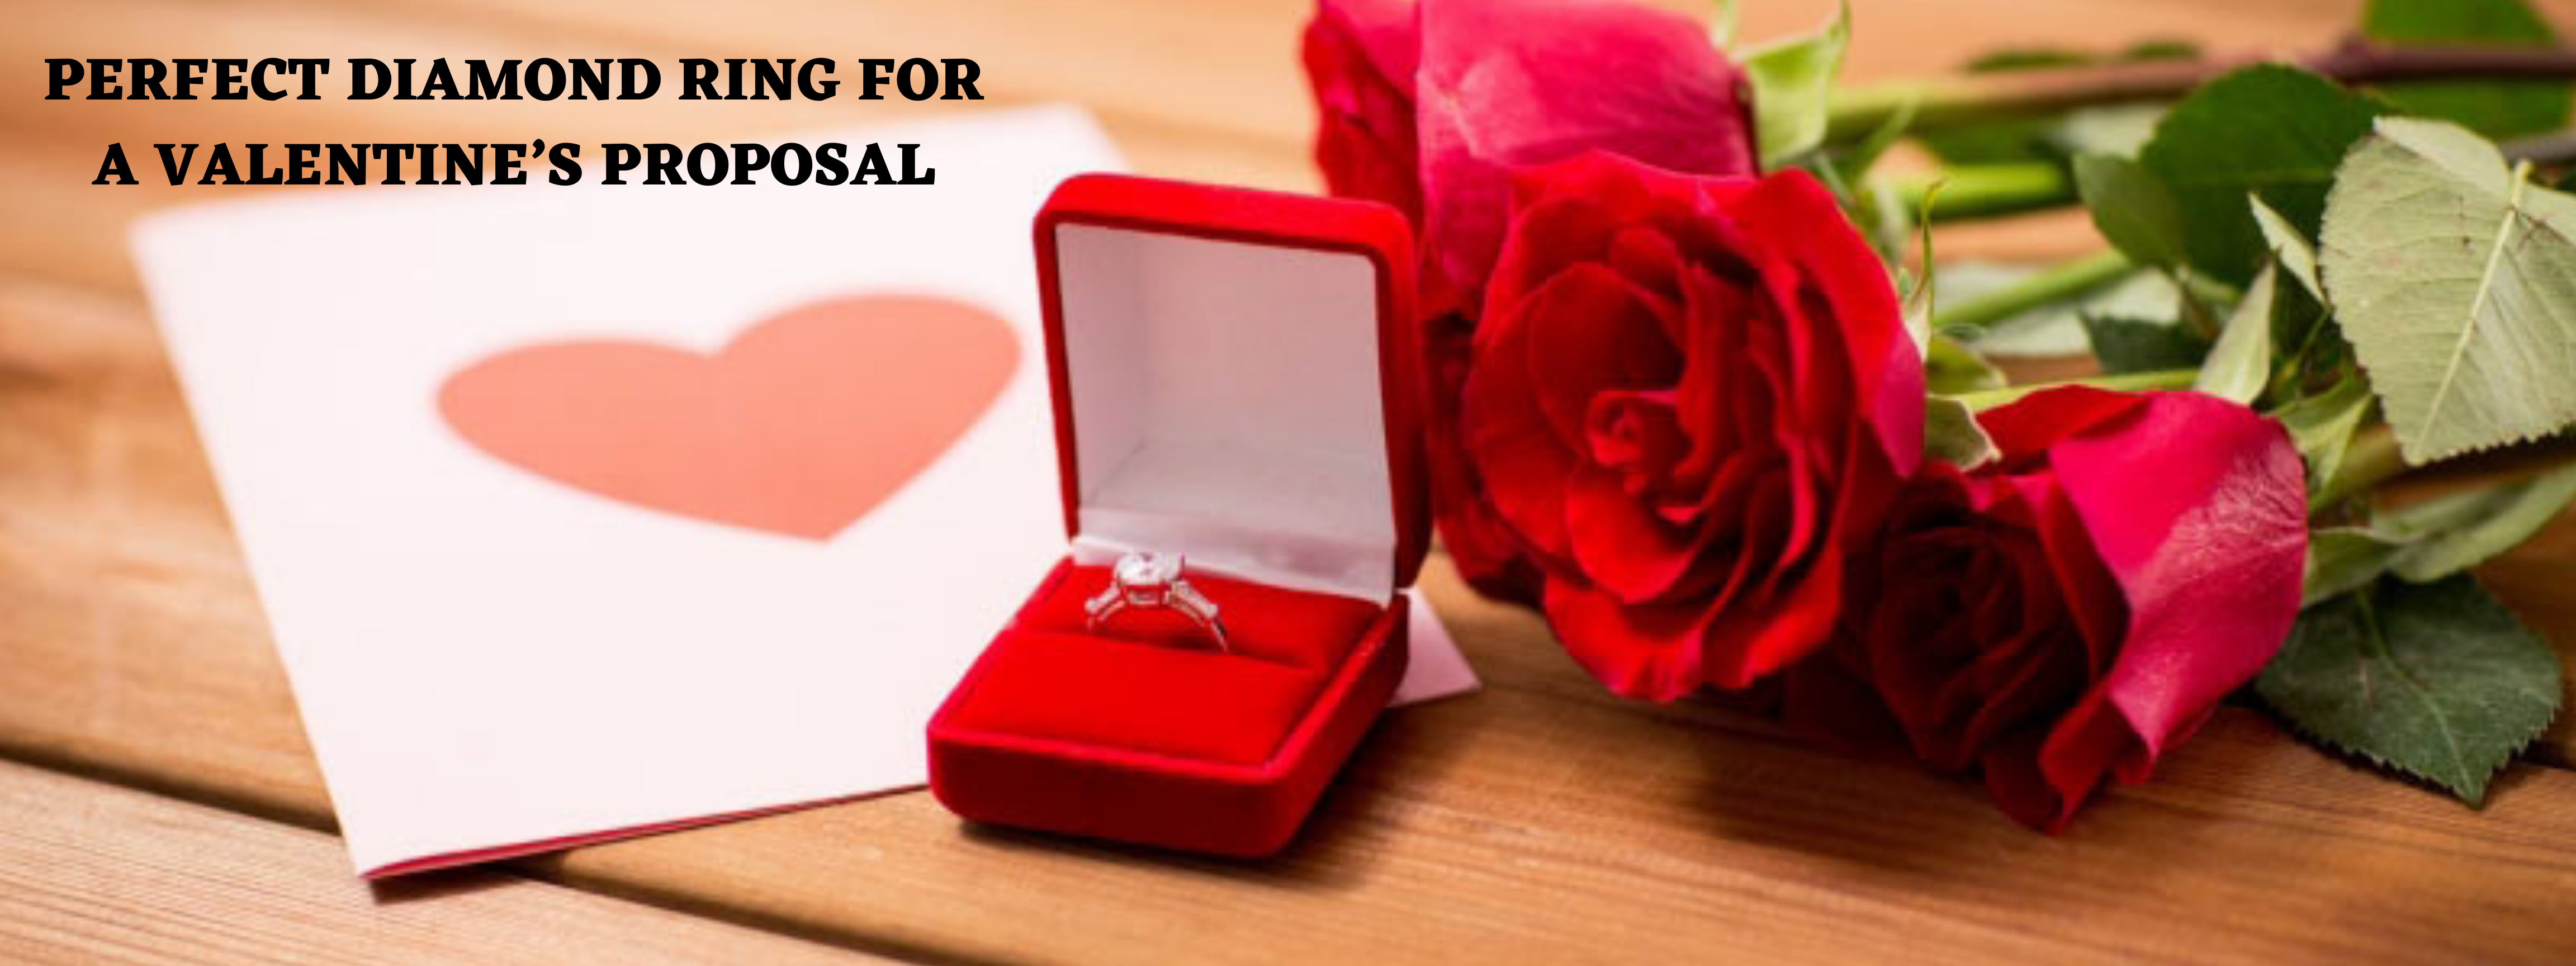 PICKING THE PERFECT DIAMOND RING FOR A VALENTINE’S PROPOSAL